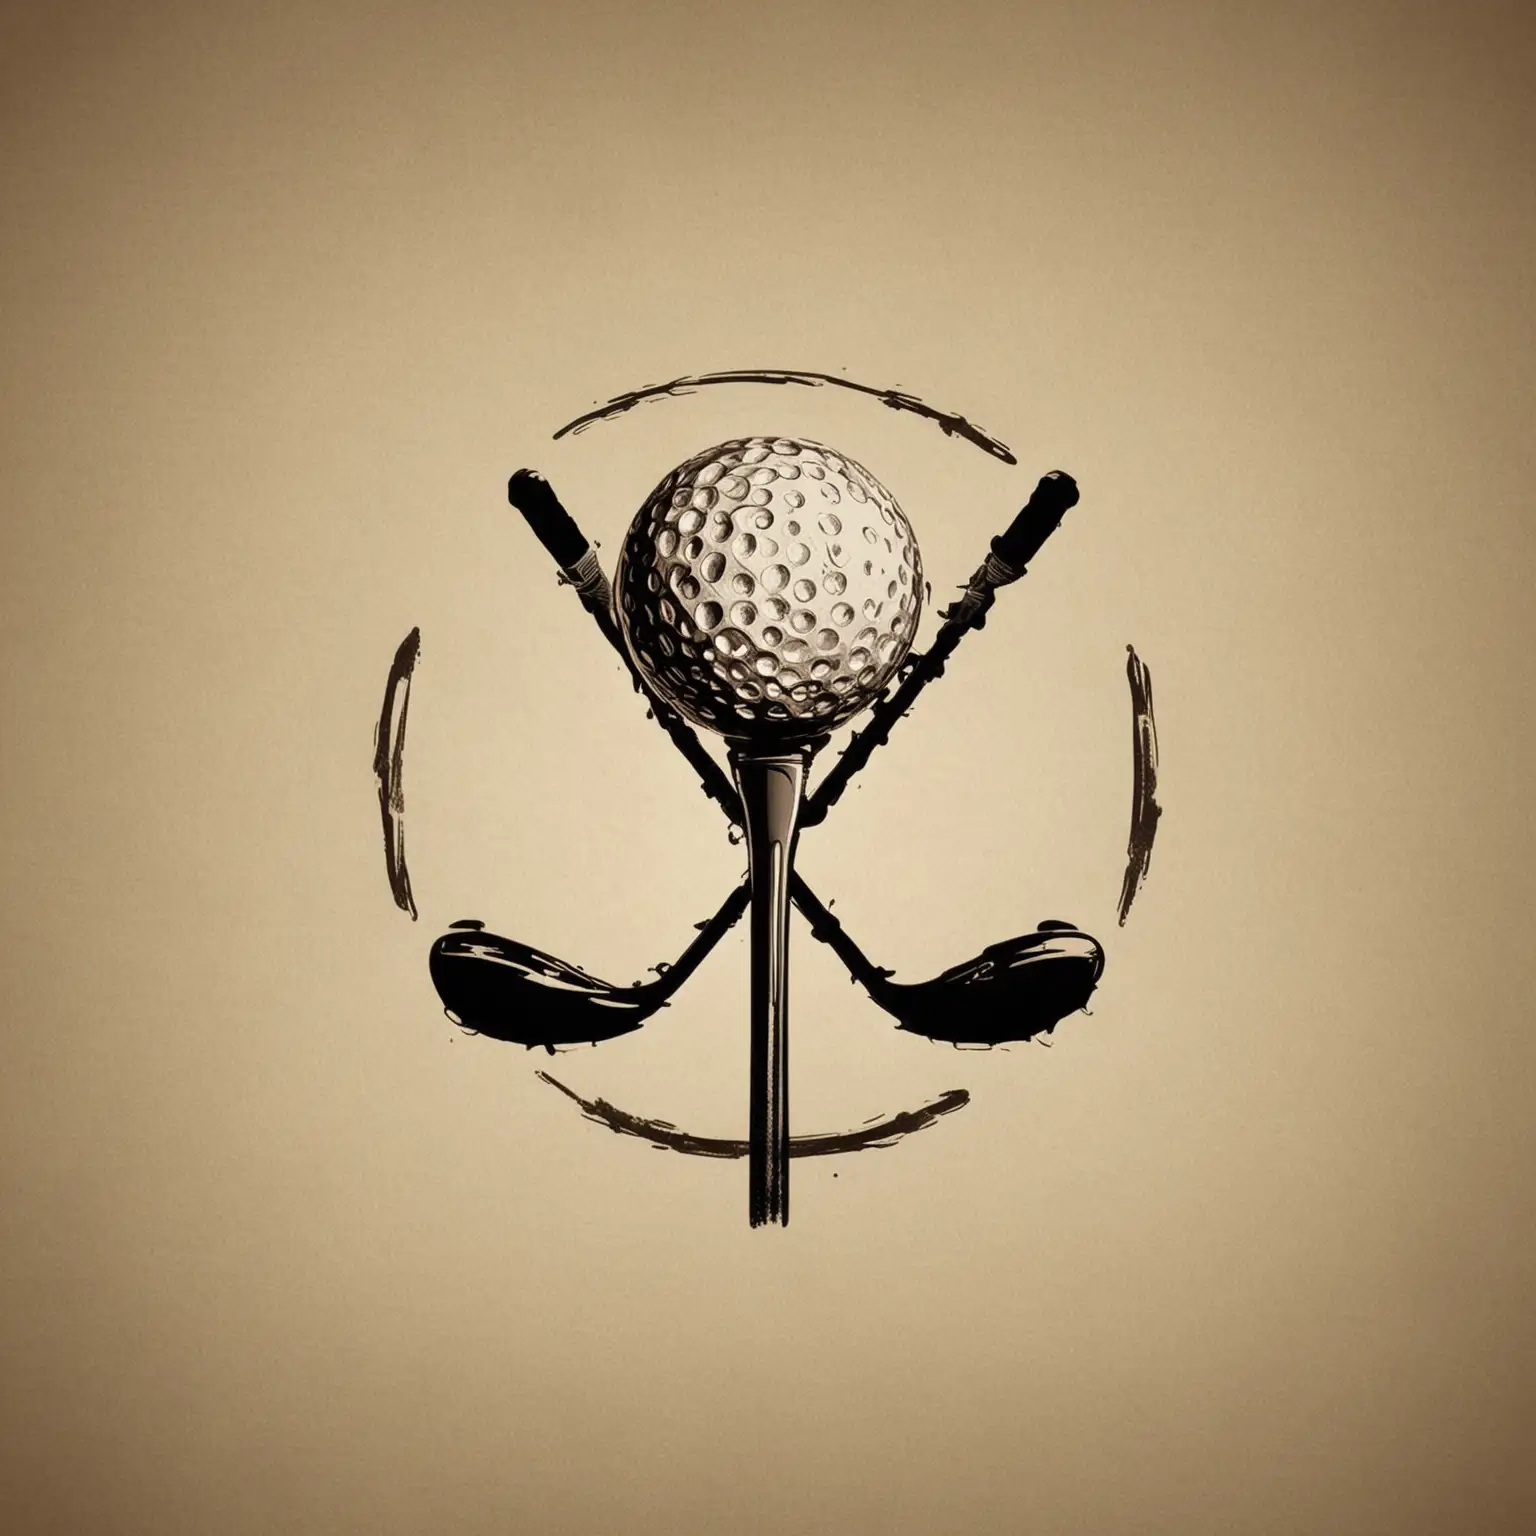 Vintage Golf Clubs Crossing Logo Design with Golf Ball